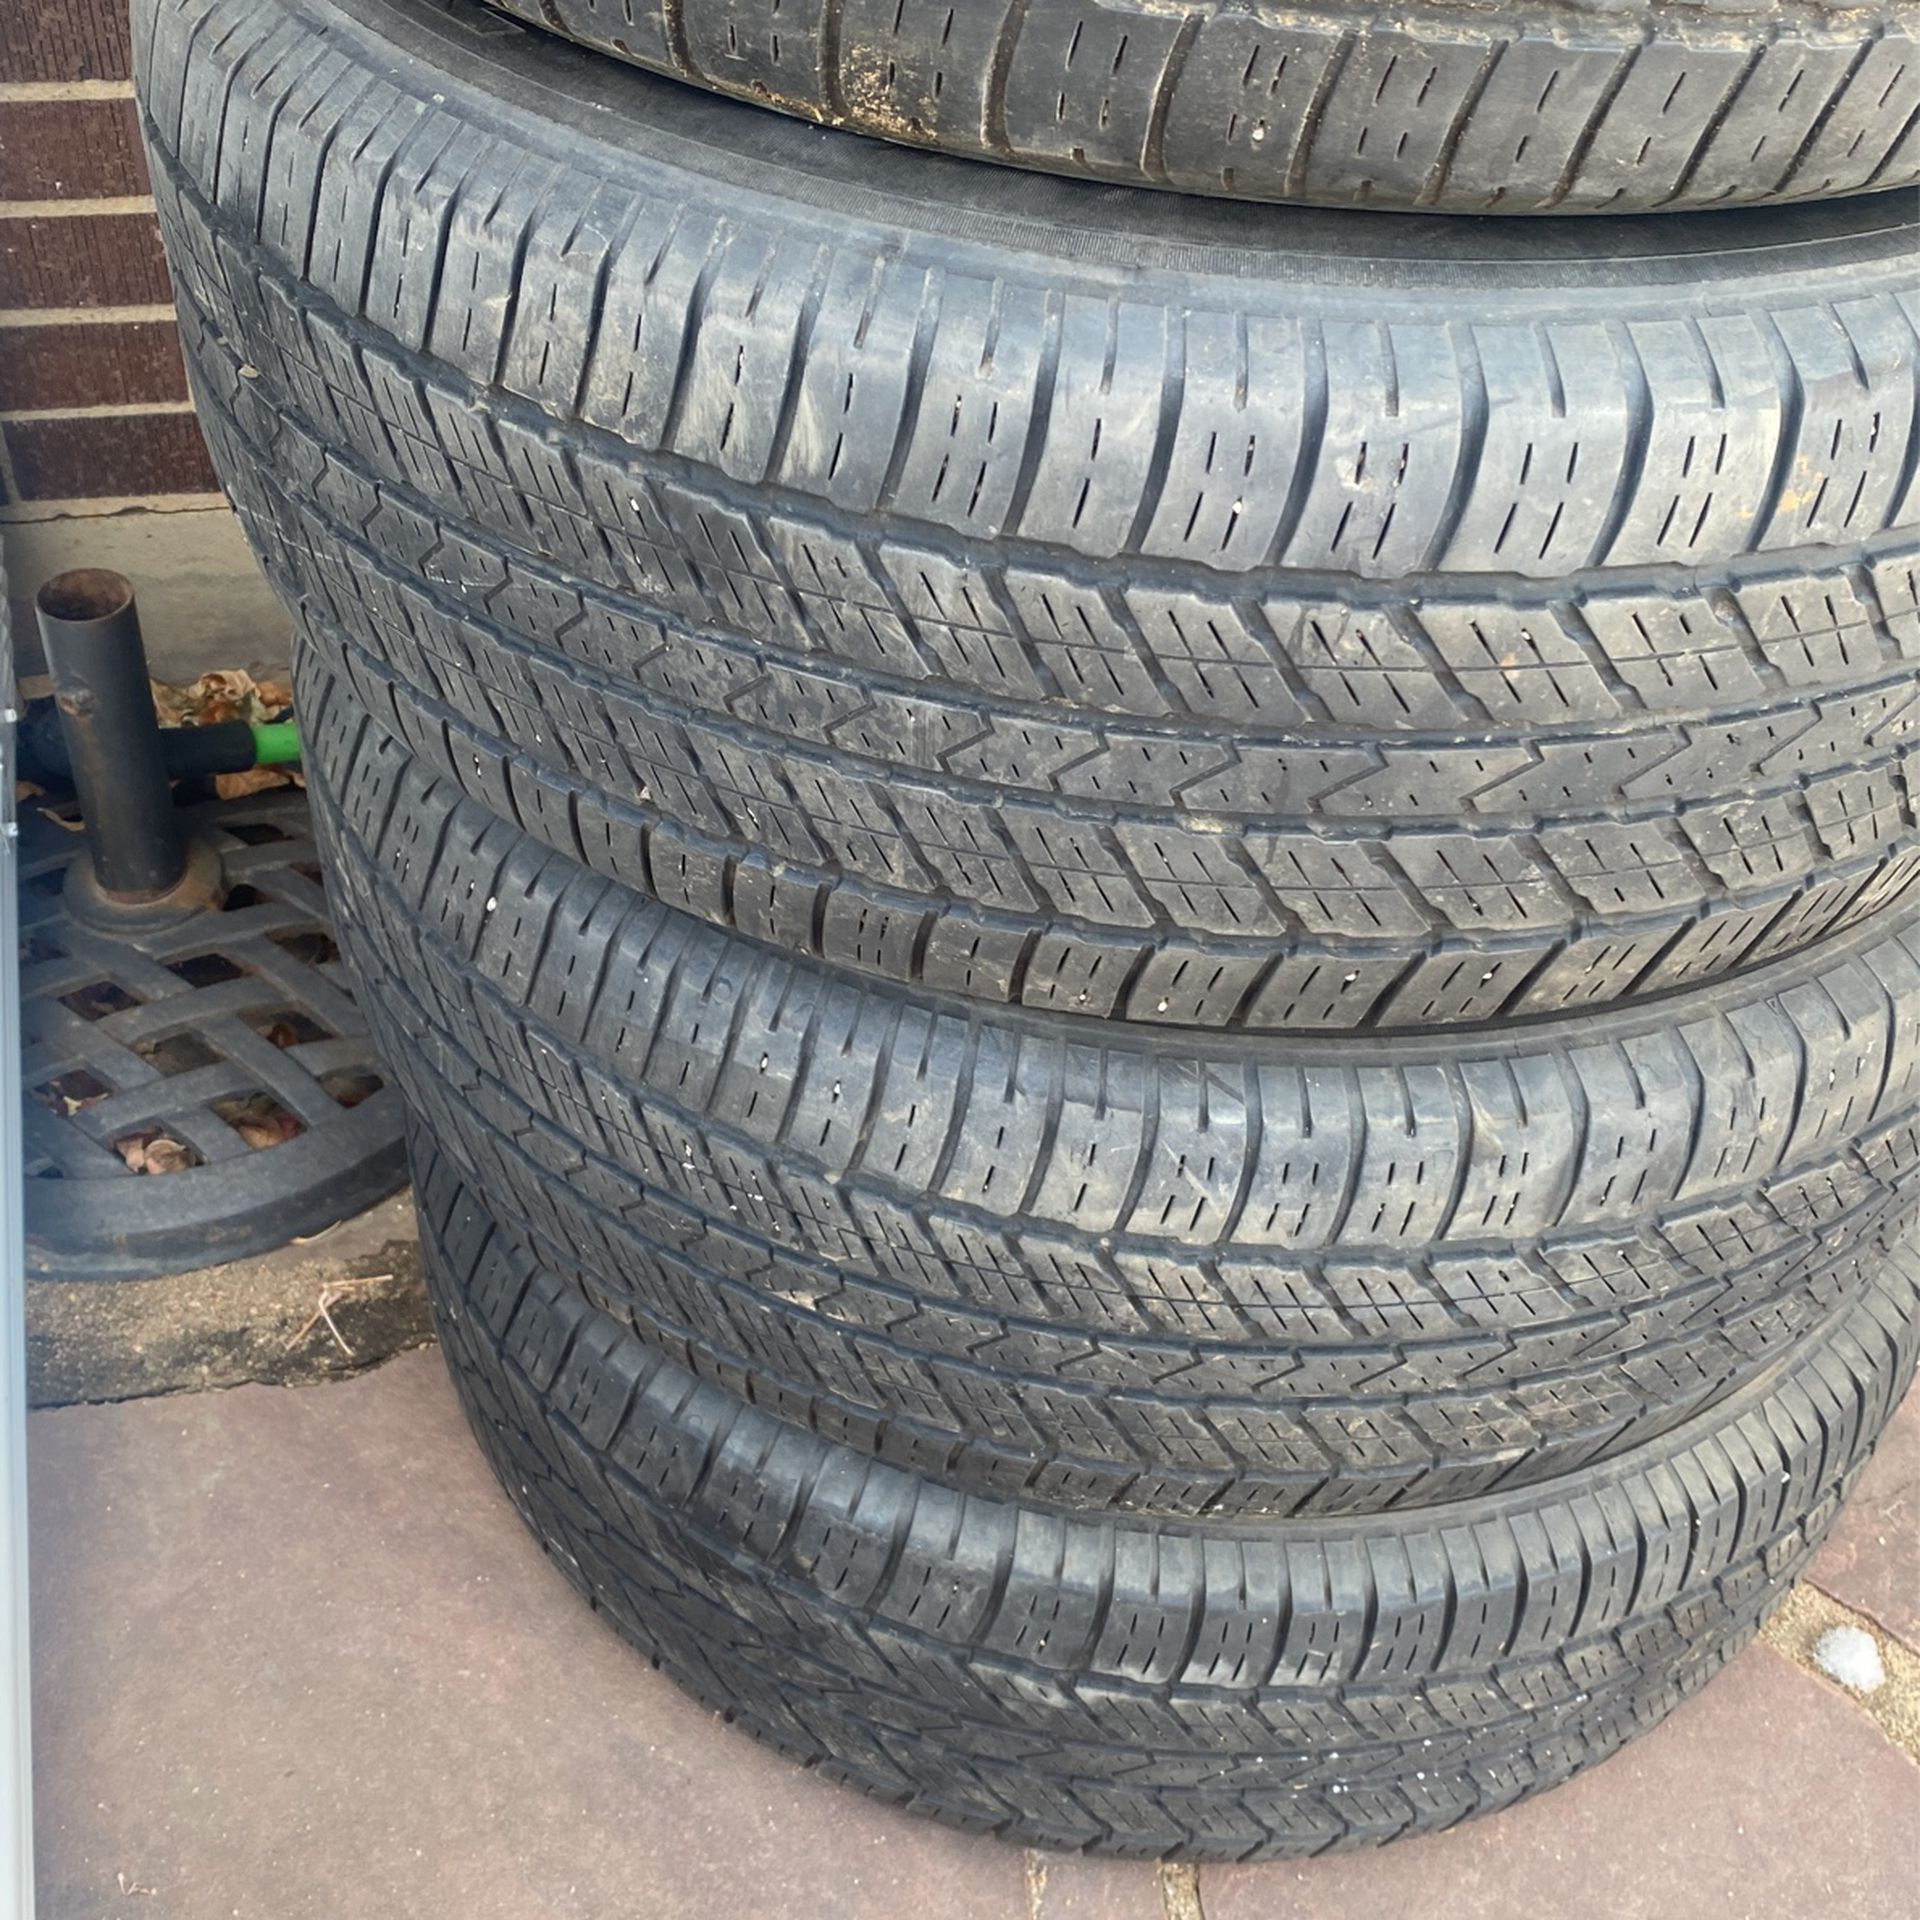 4 Matching Used Tires. Excellent Condition Toyo A30. 265/65r17